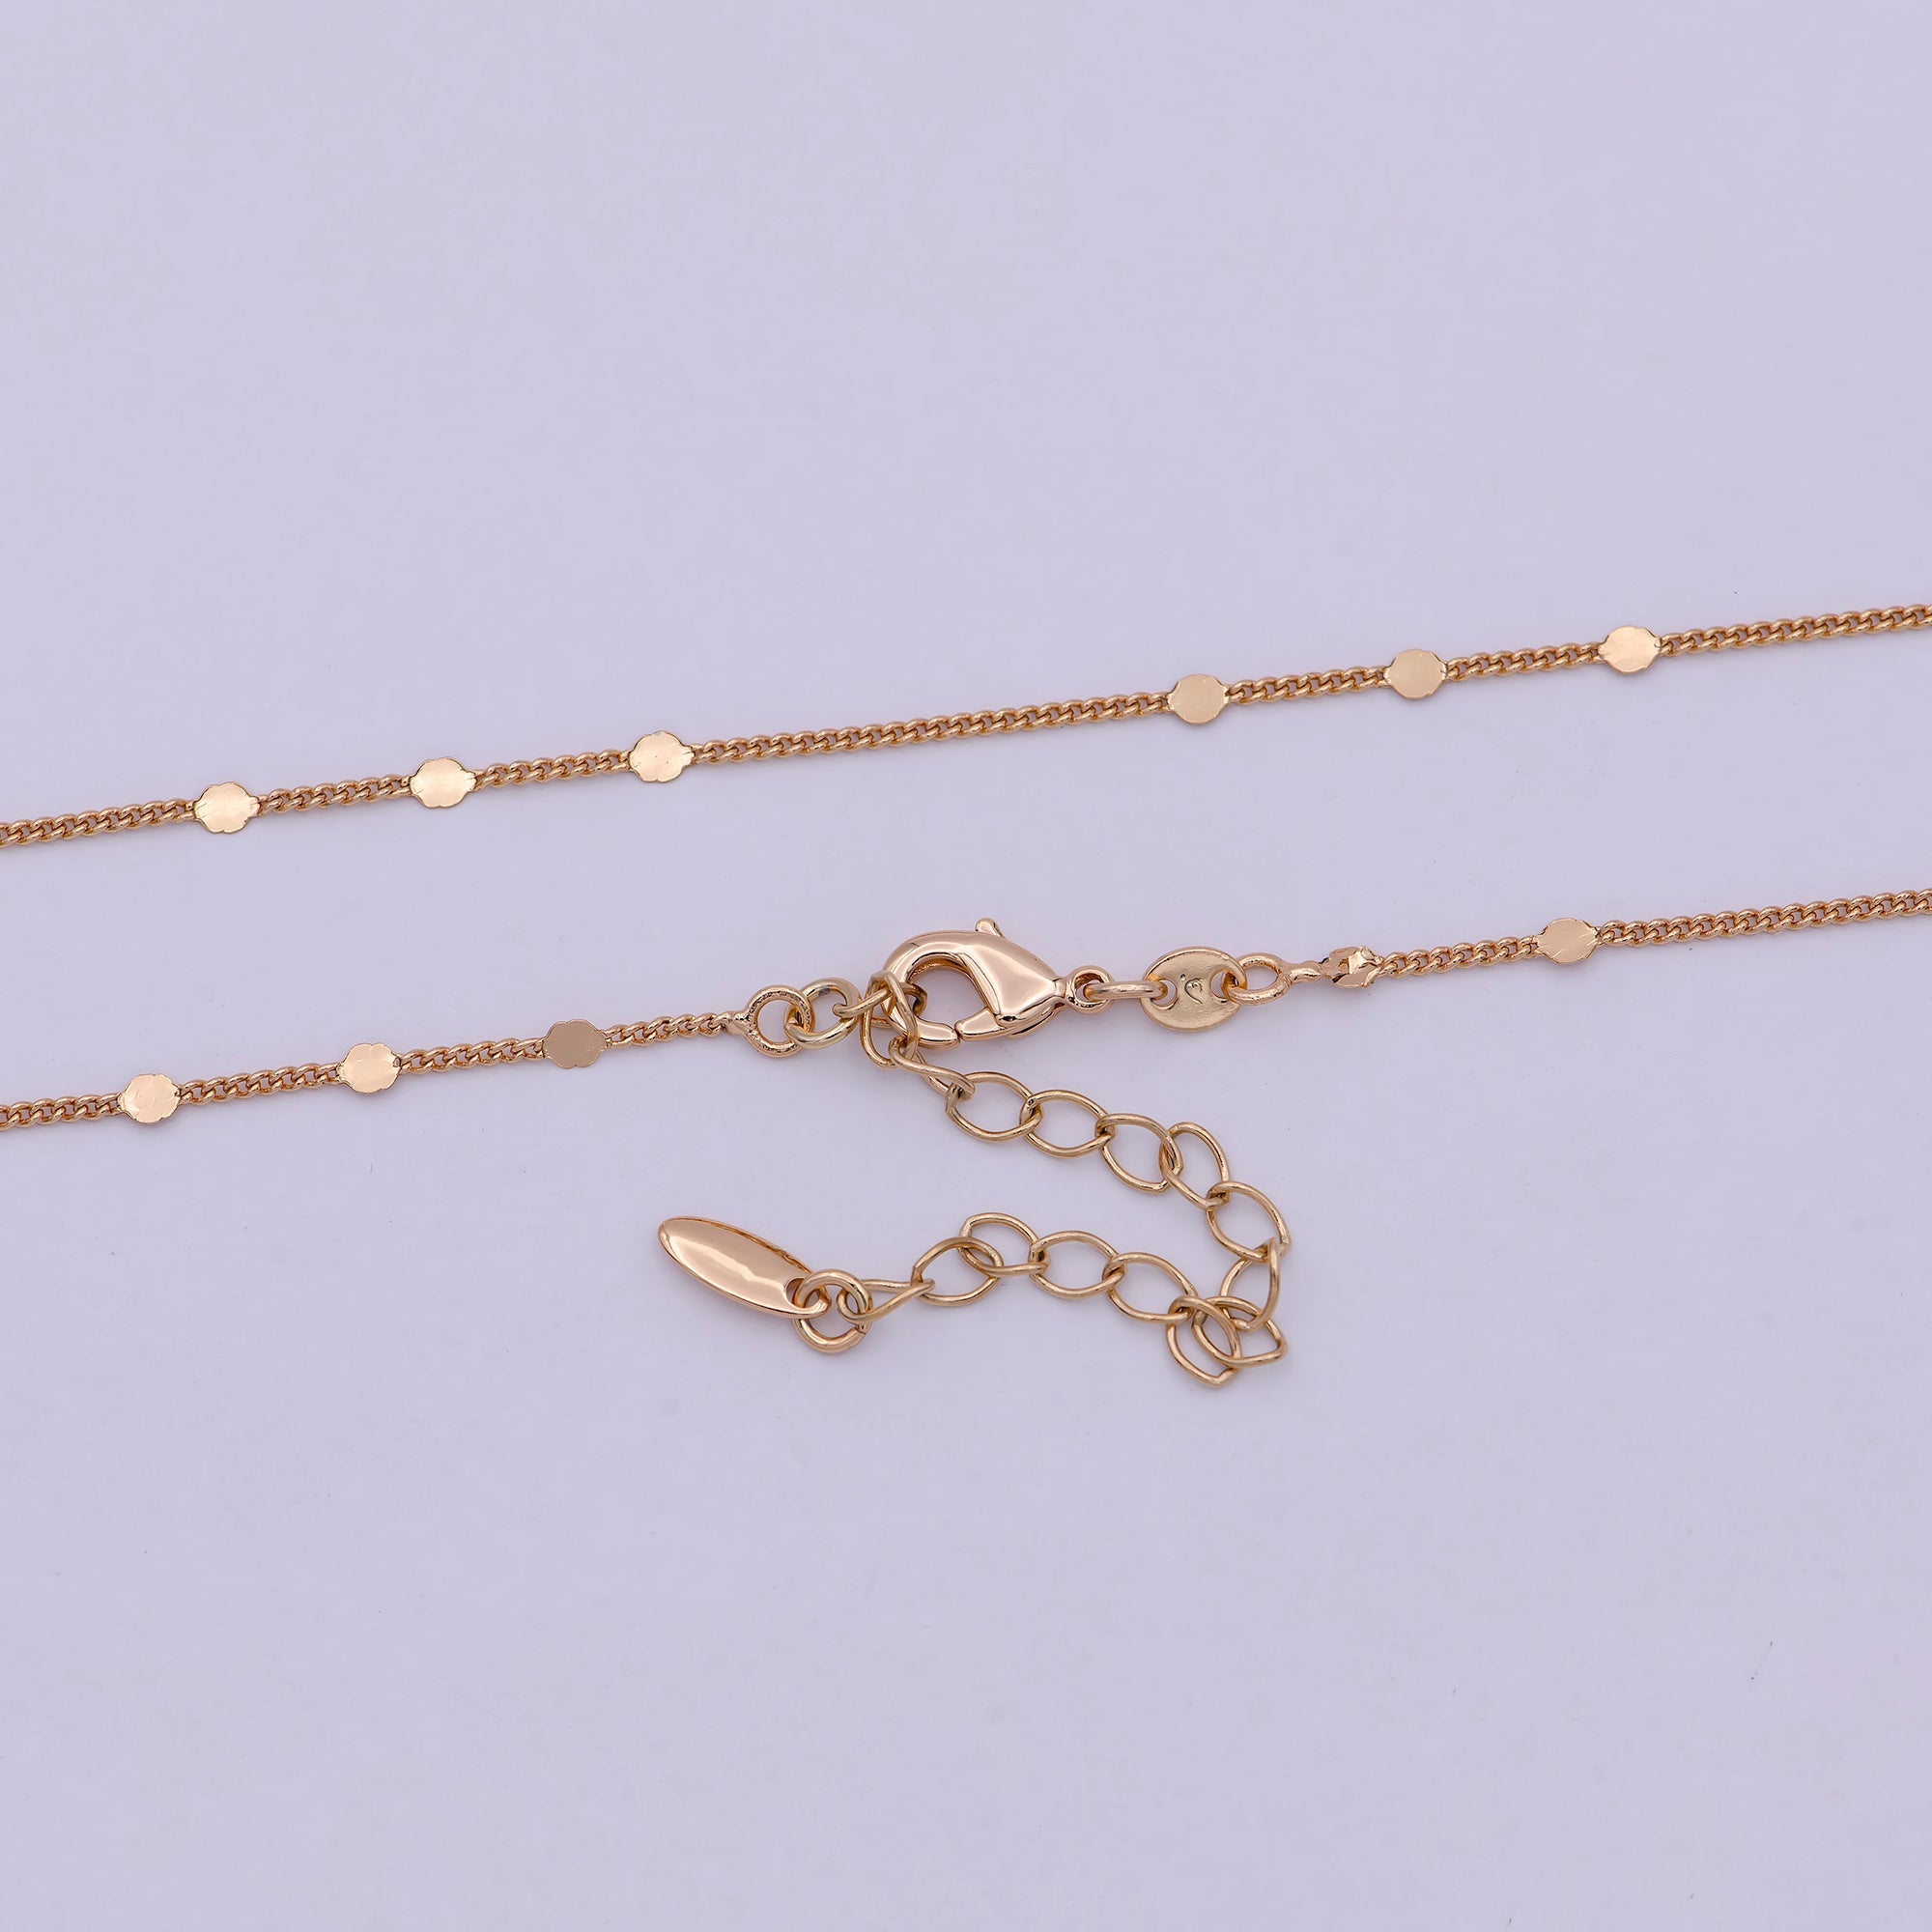 1mm 18K Gold Filled Chain Necklace Gold Curb Chain, Gold Chains 18 inch + 2 inch extender wa-542 - DLUXCA